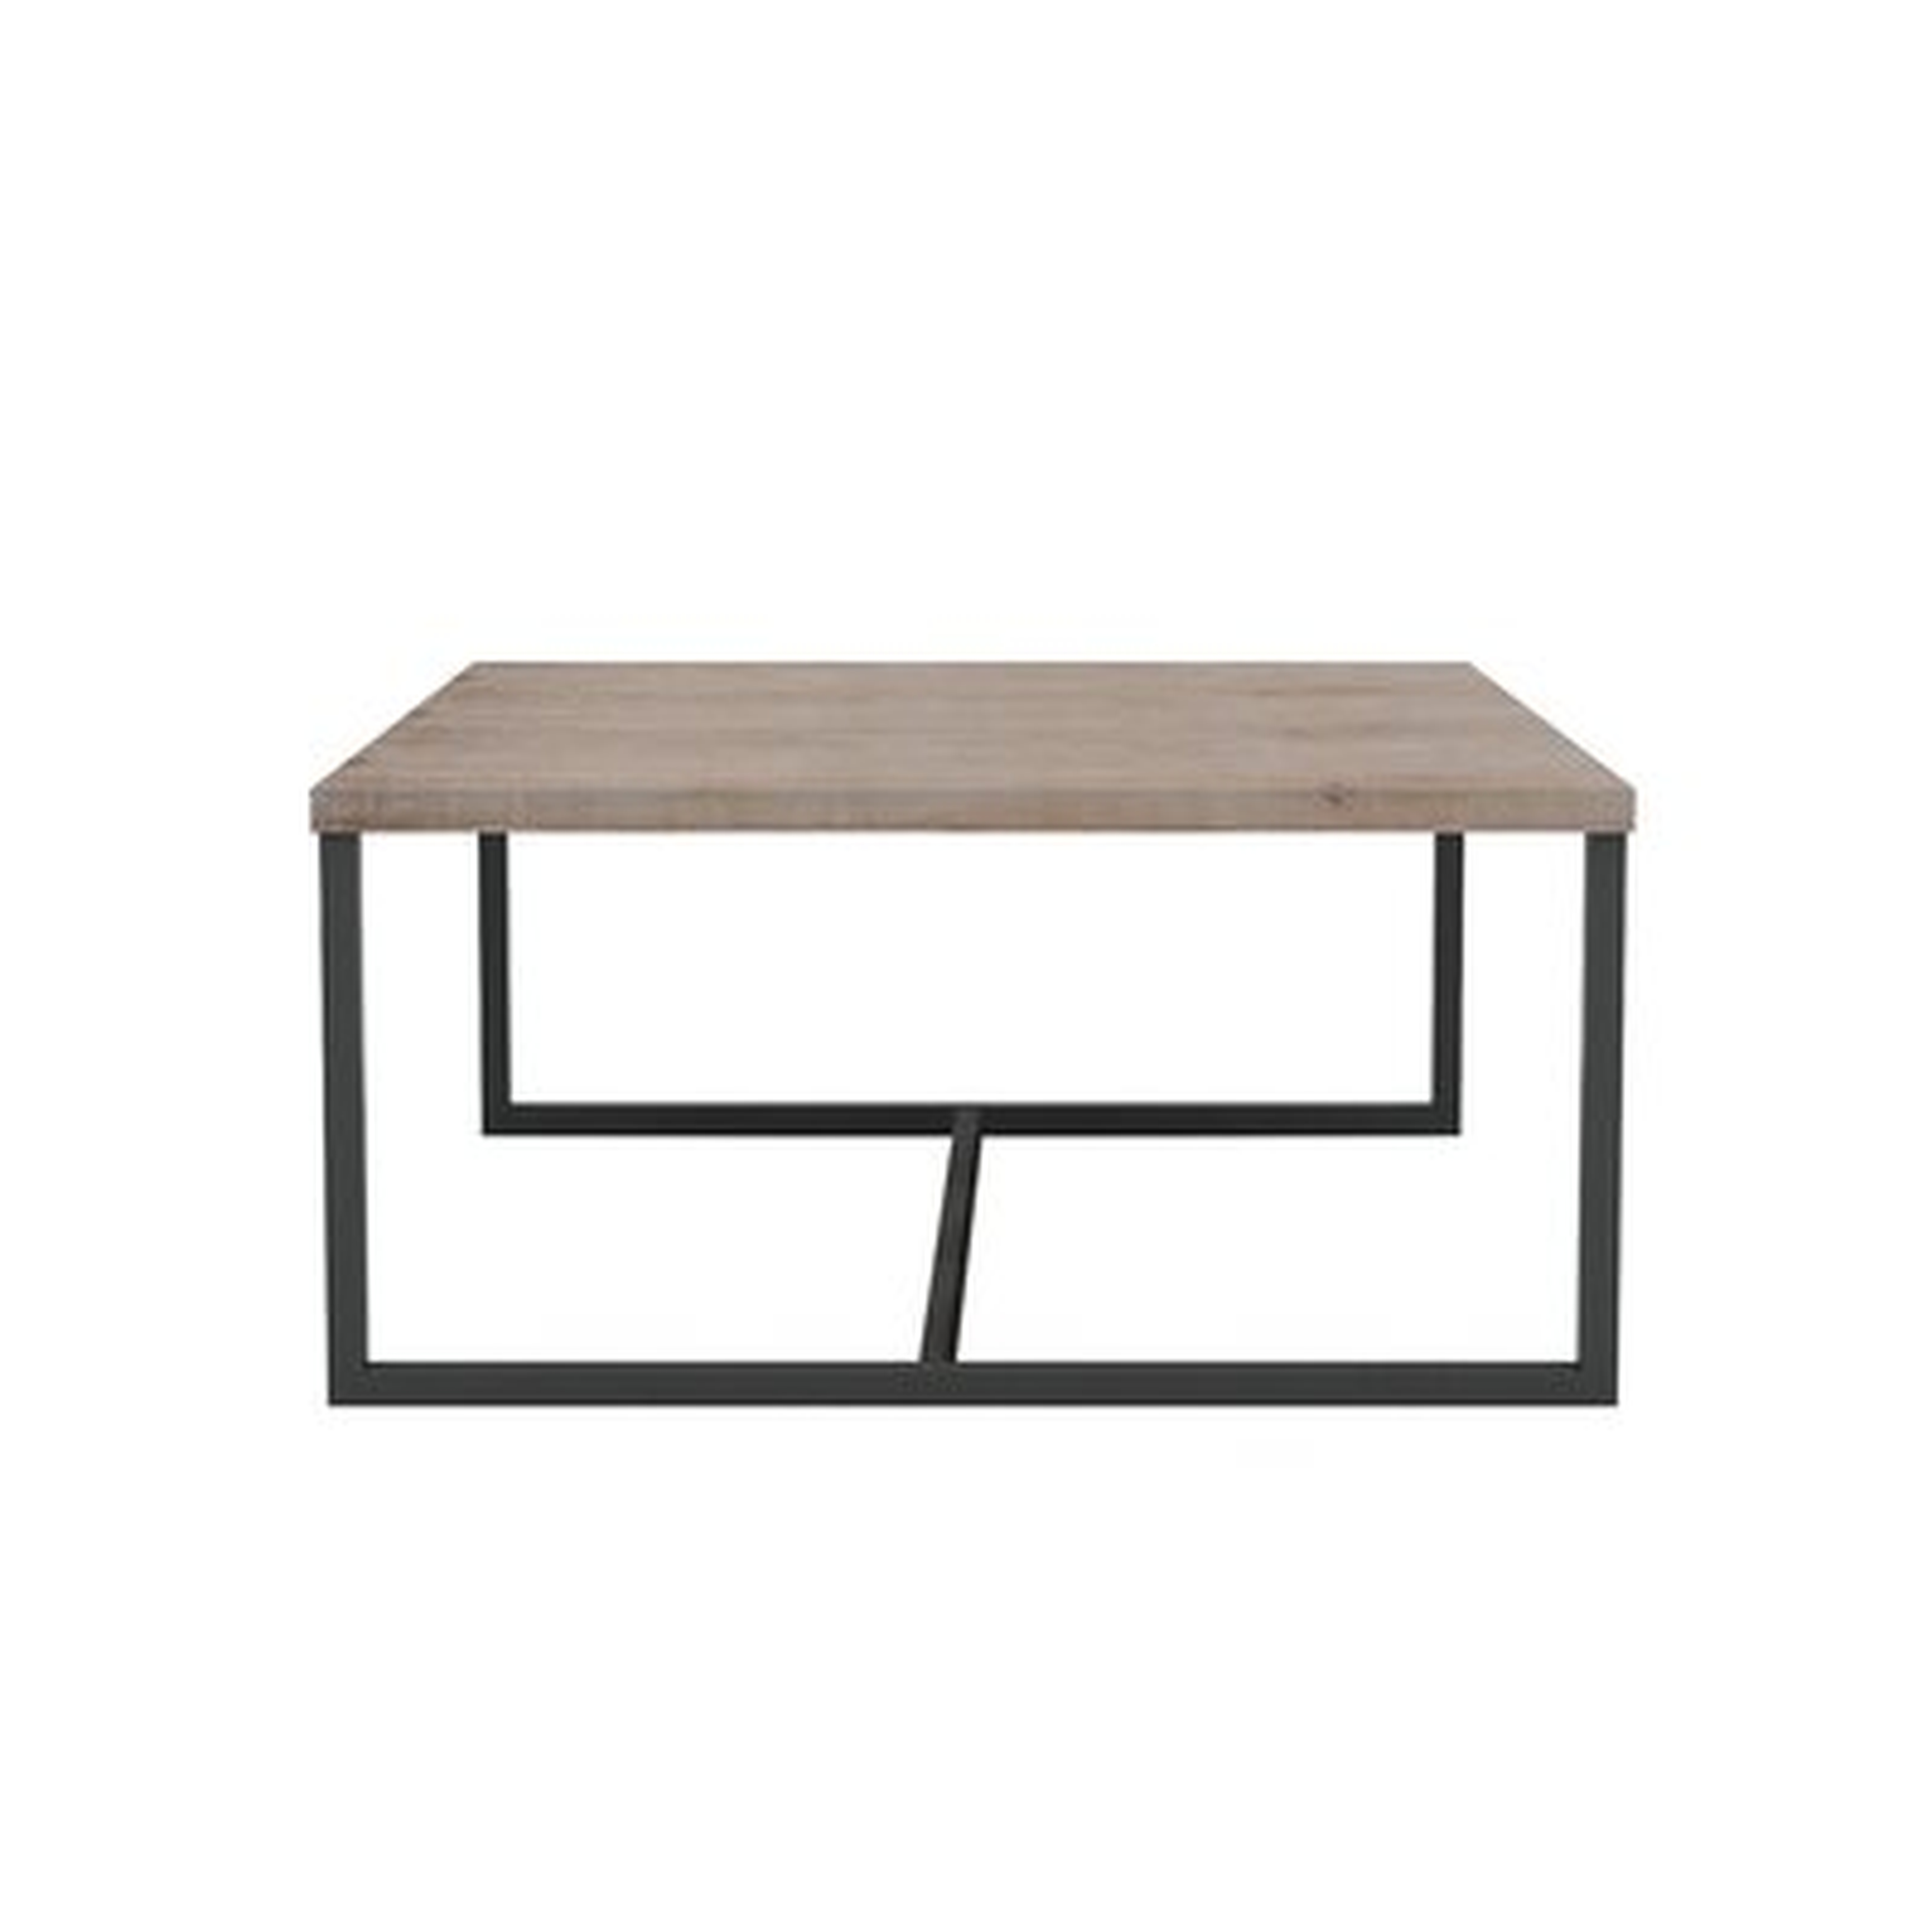 Shivers Sled Coffee Table - AllModern